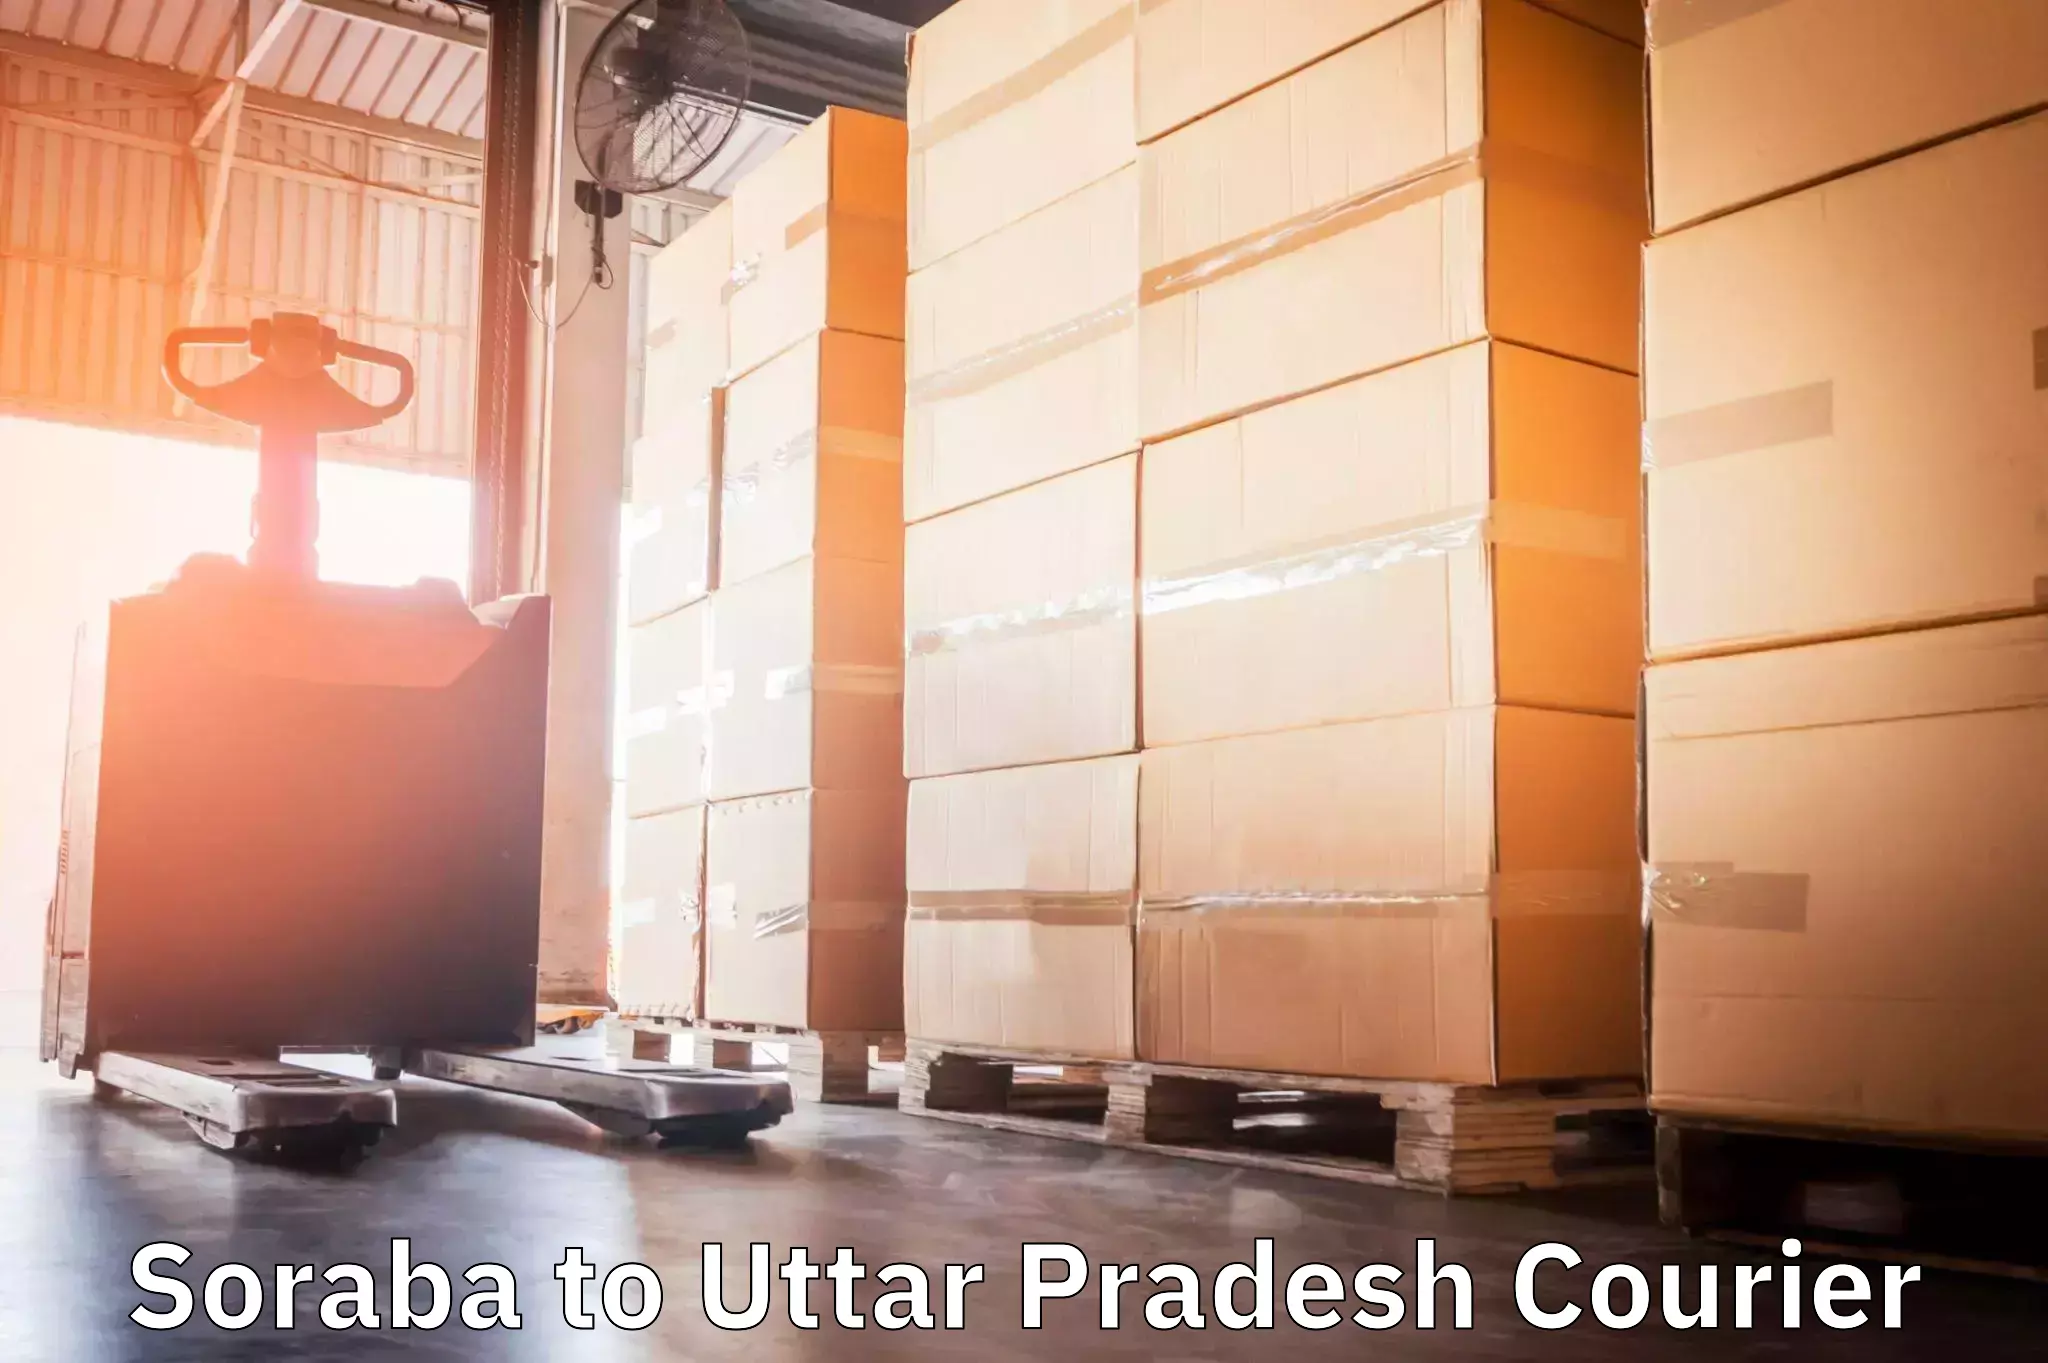 Online package tracking Soraba to Firozabad